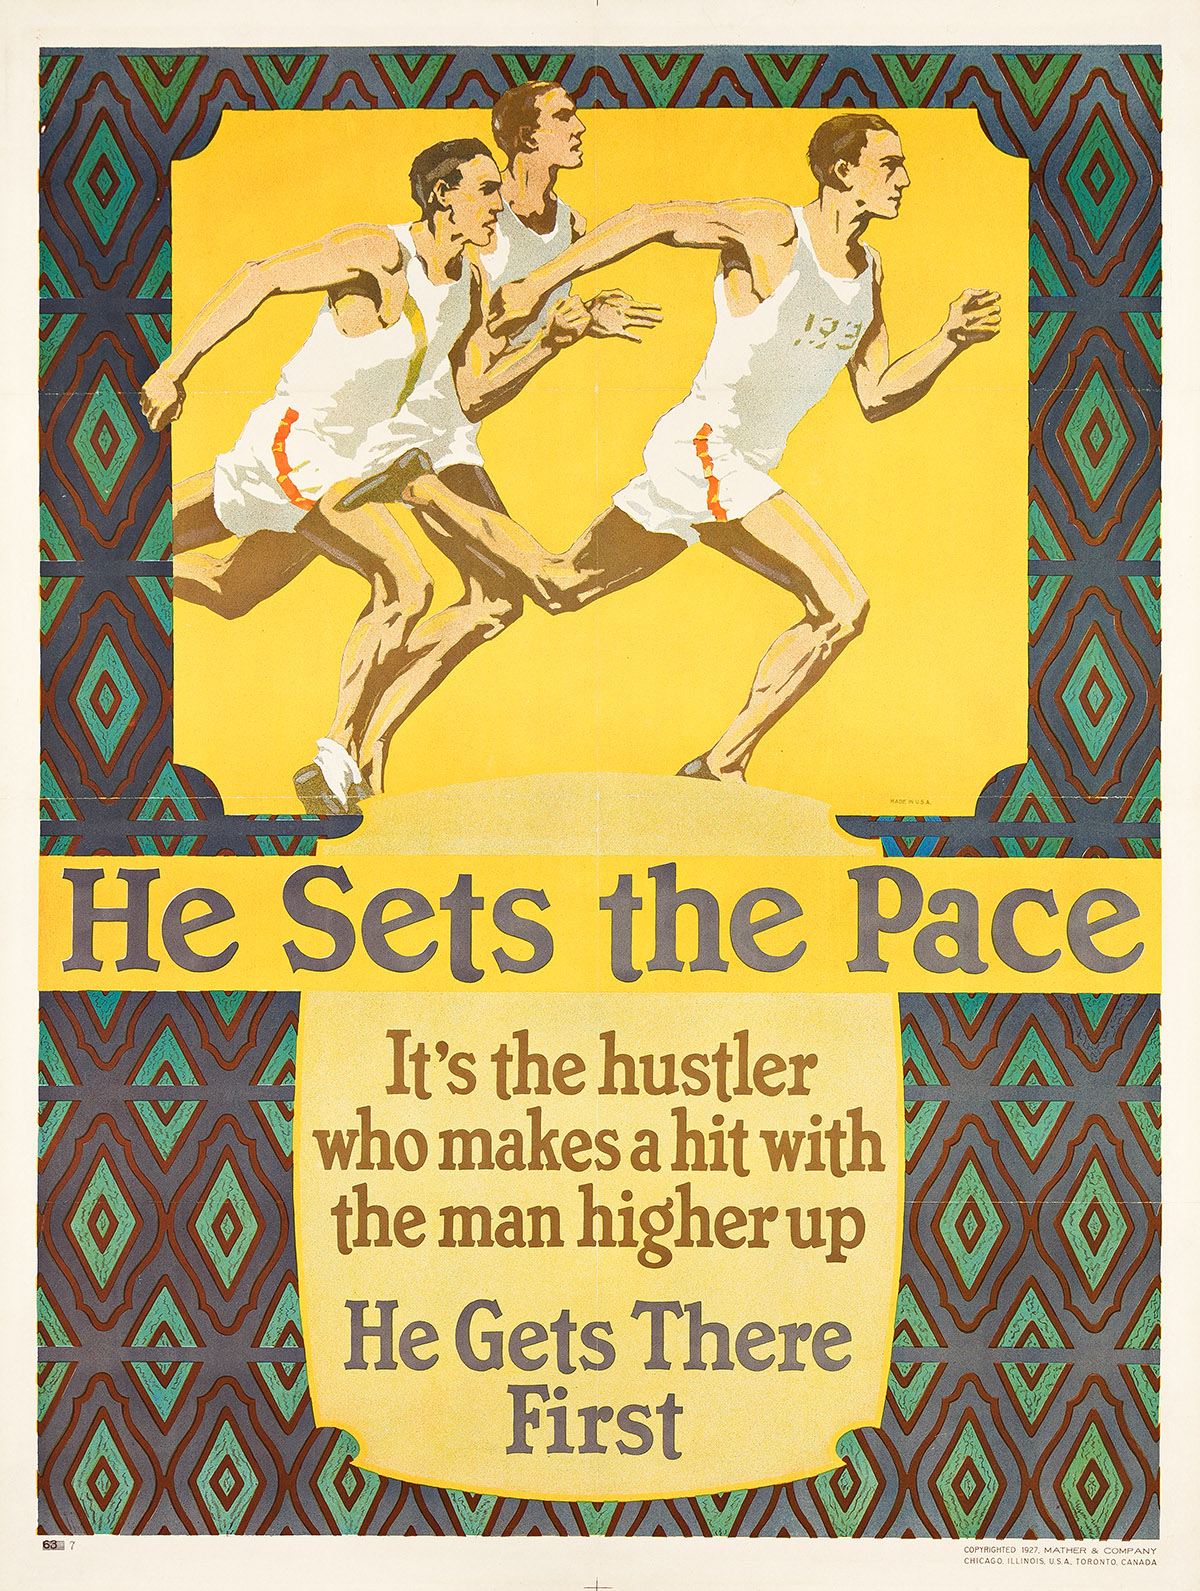 DESIGNER UNKNOWN. HE SETS THE PACE / HE GETS THERE FIRST. 1927. 48x36 inches, 122x91½ cm. Mather & Company, Chicago.